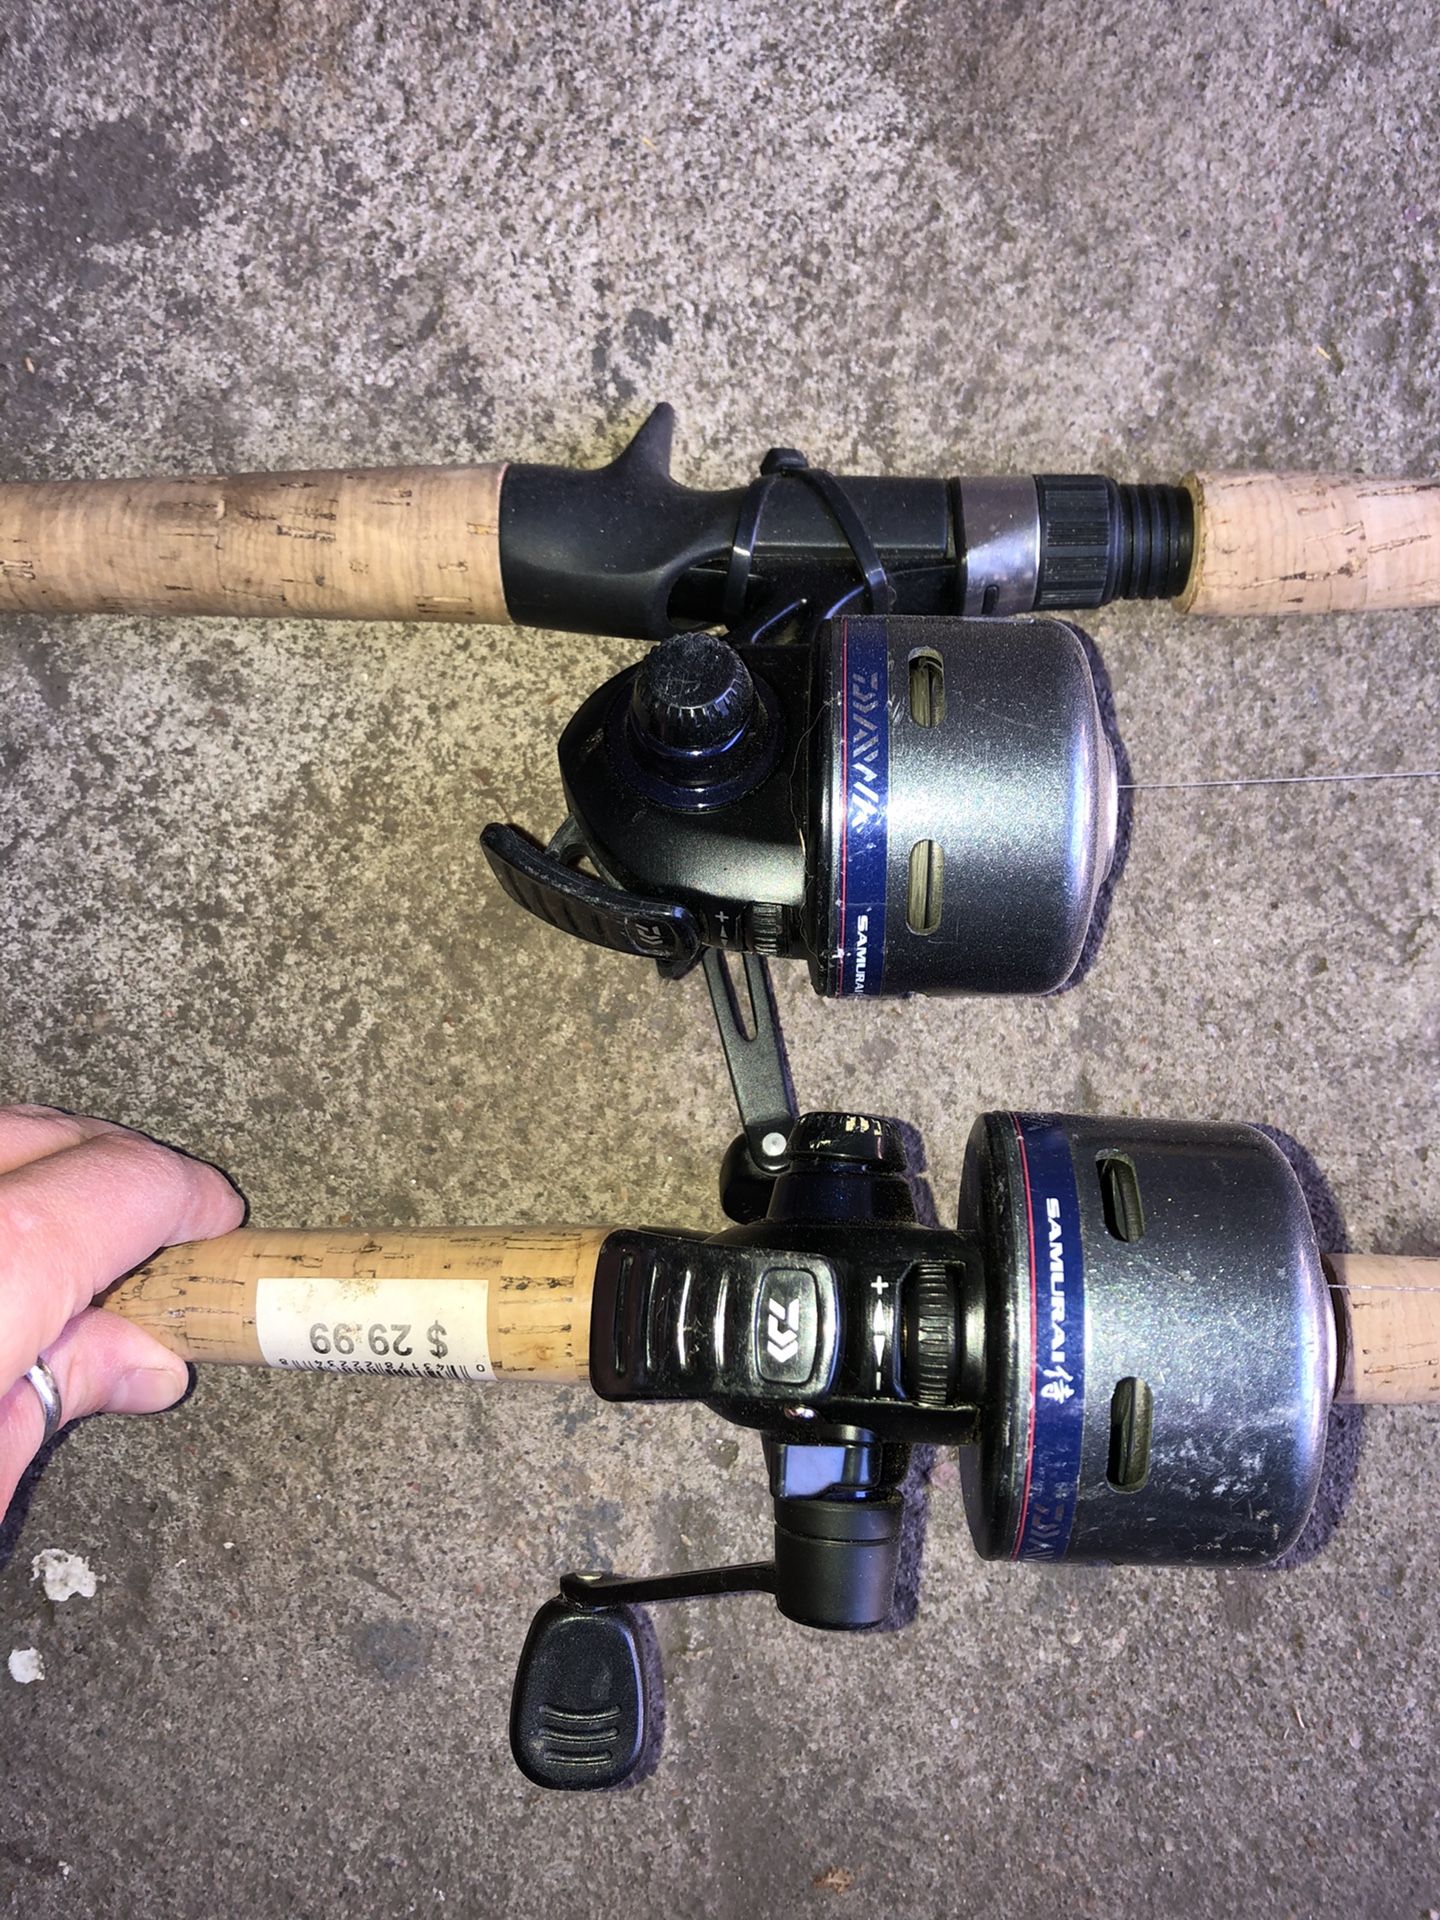 Combo fishing reels! A steal!